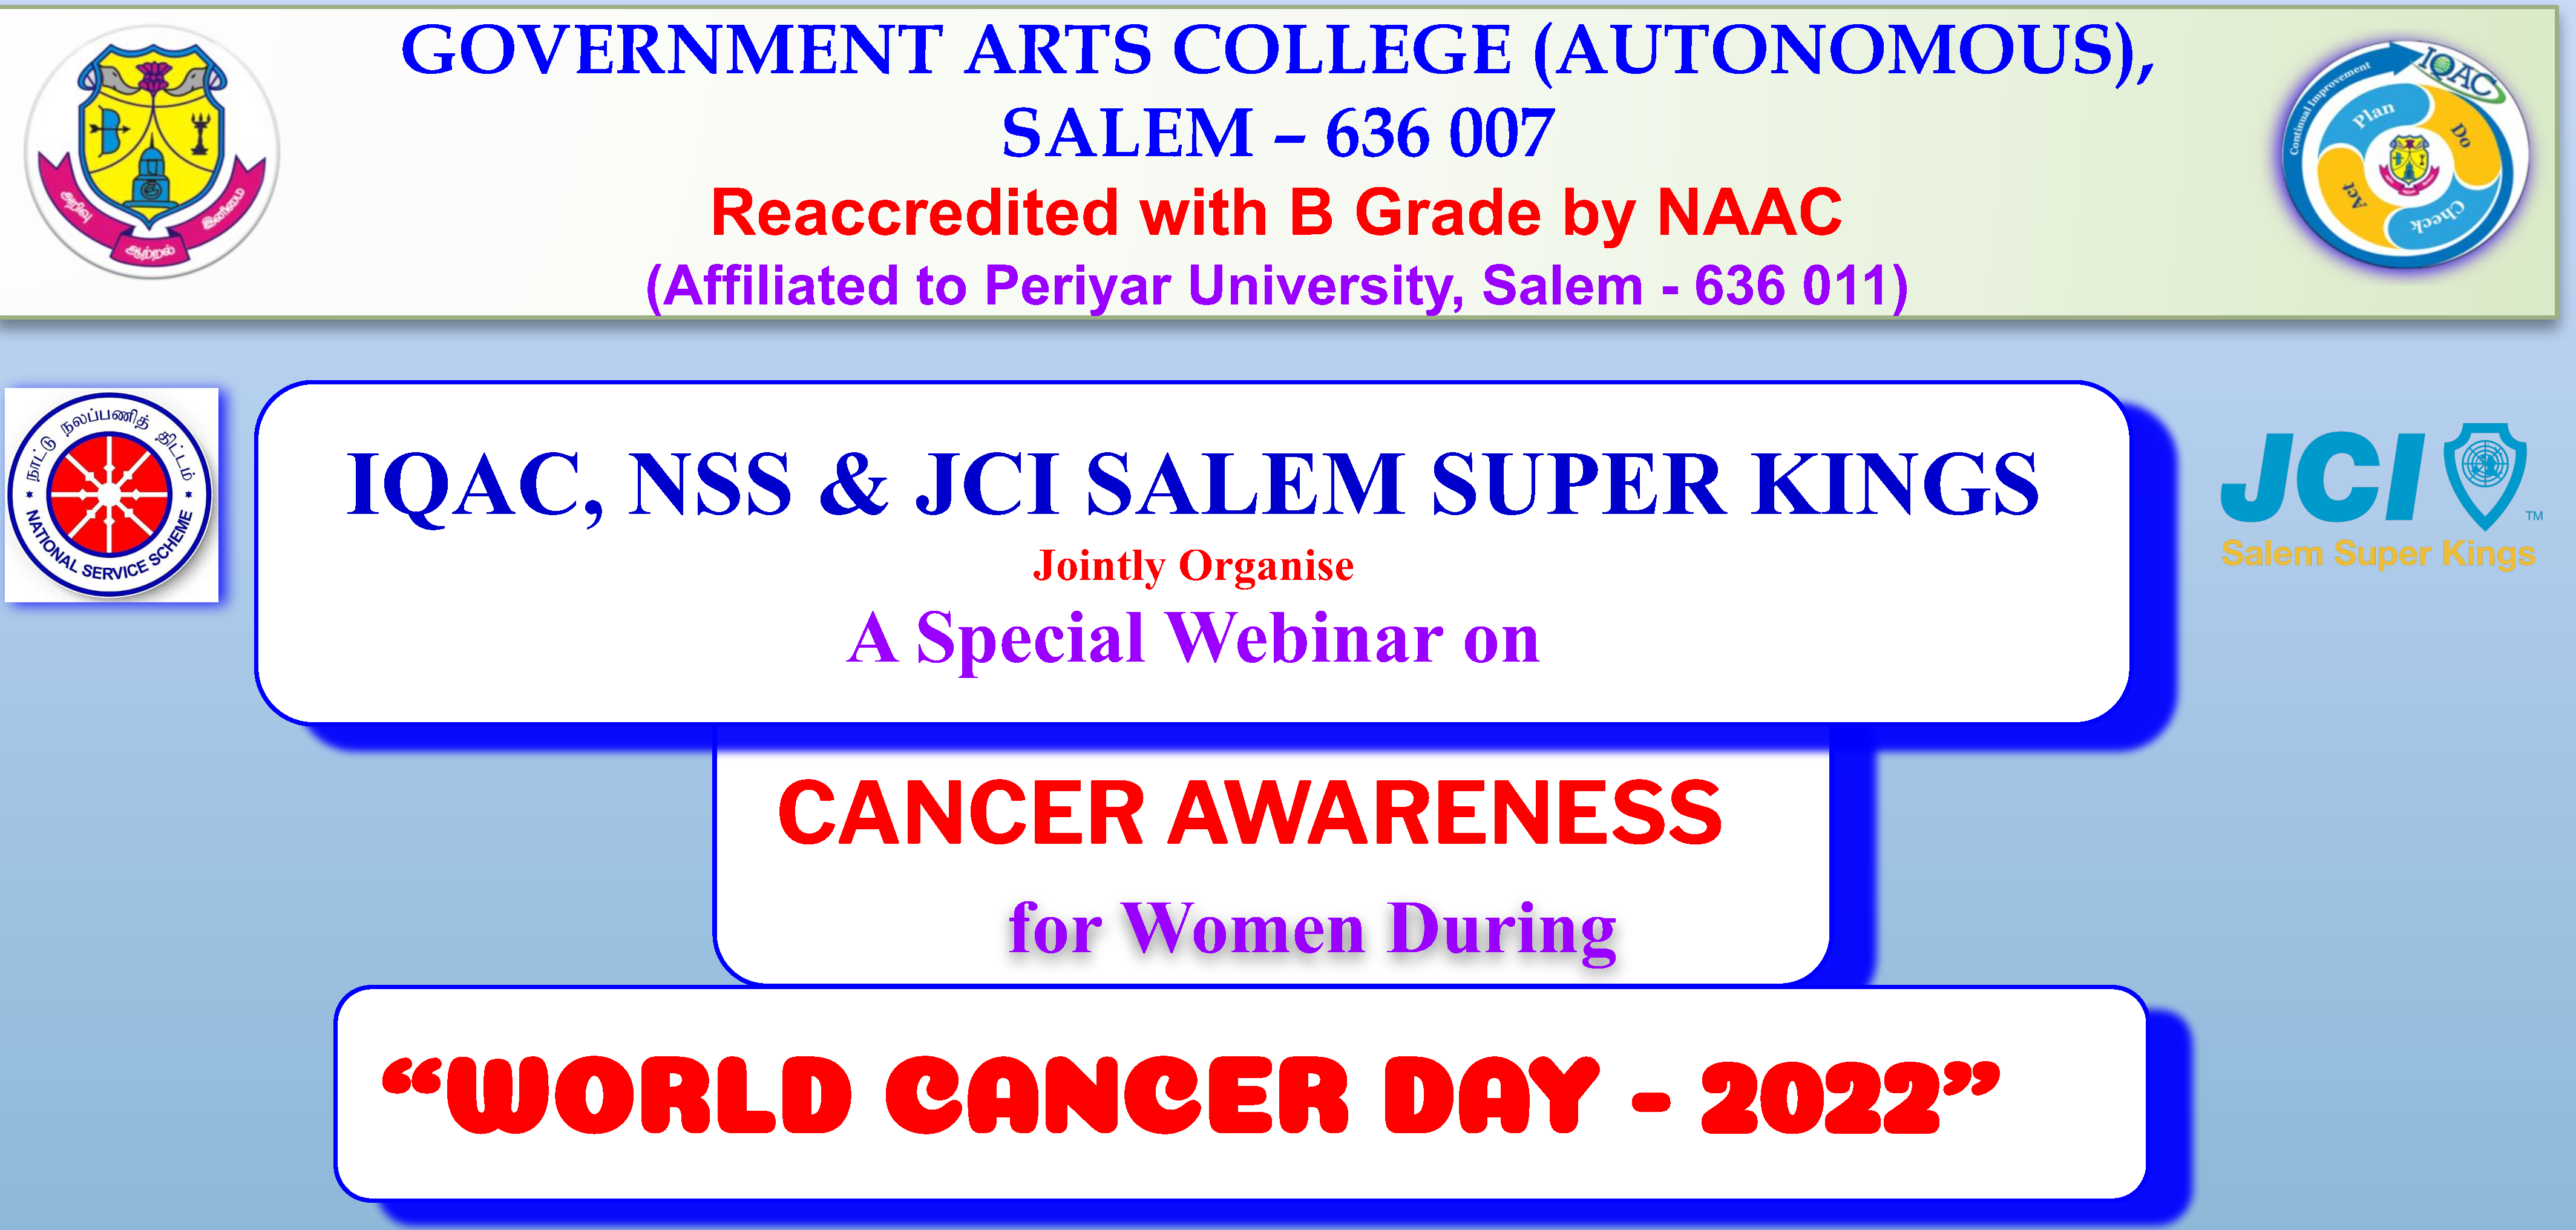 IQAC, NSS and JCI Salem Super Kings Jointly organize a special webinar on Cancer Awareness for Women during “World Cancer Day-2022”